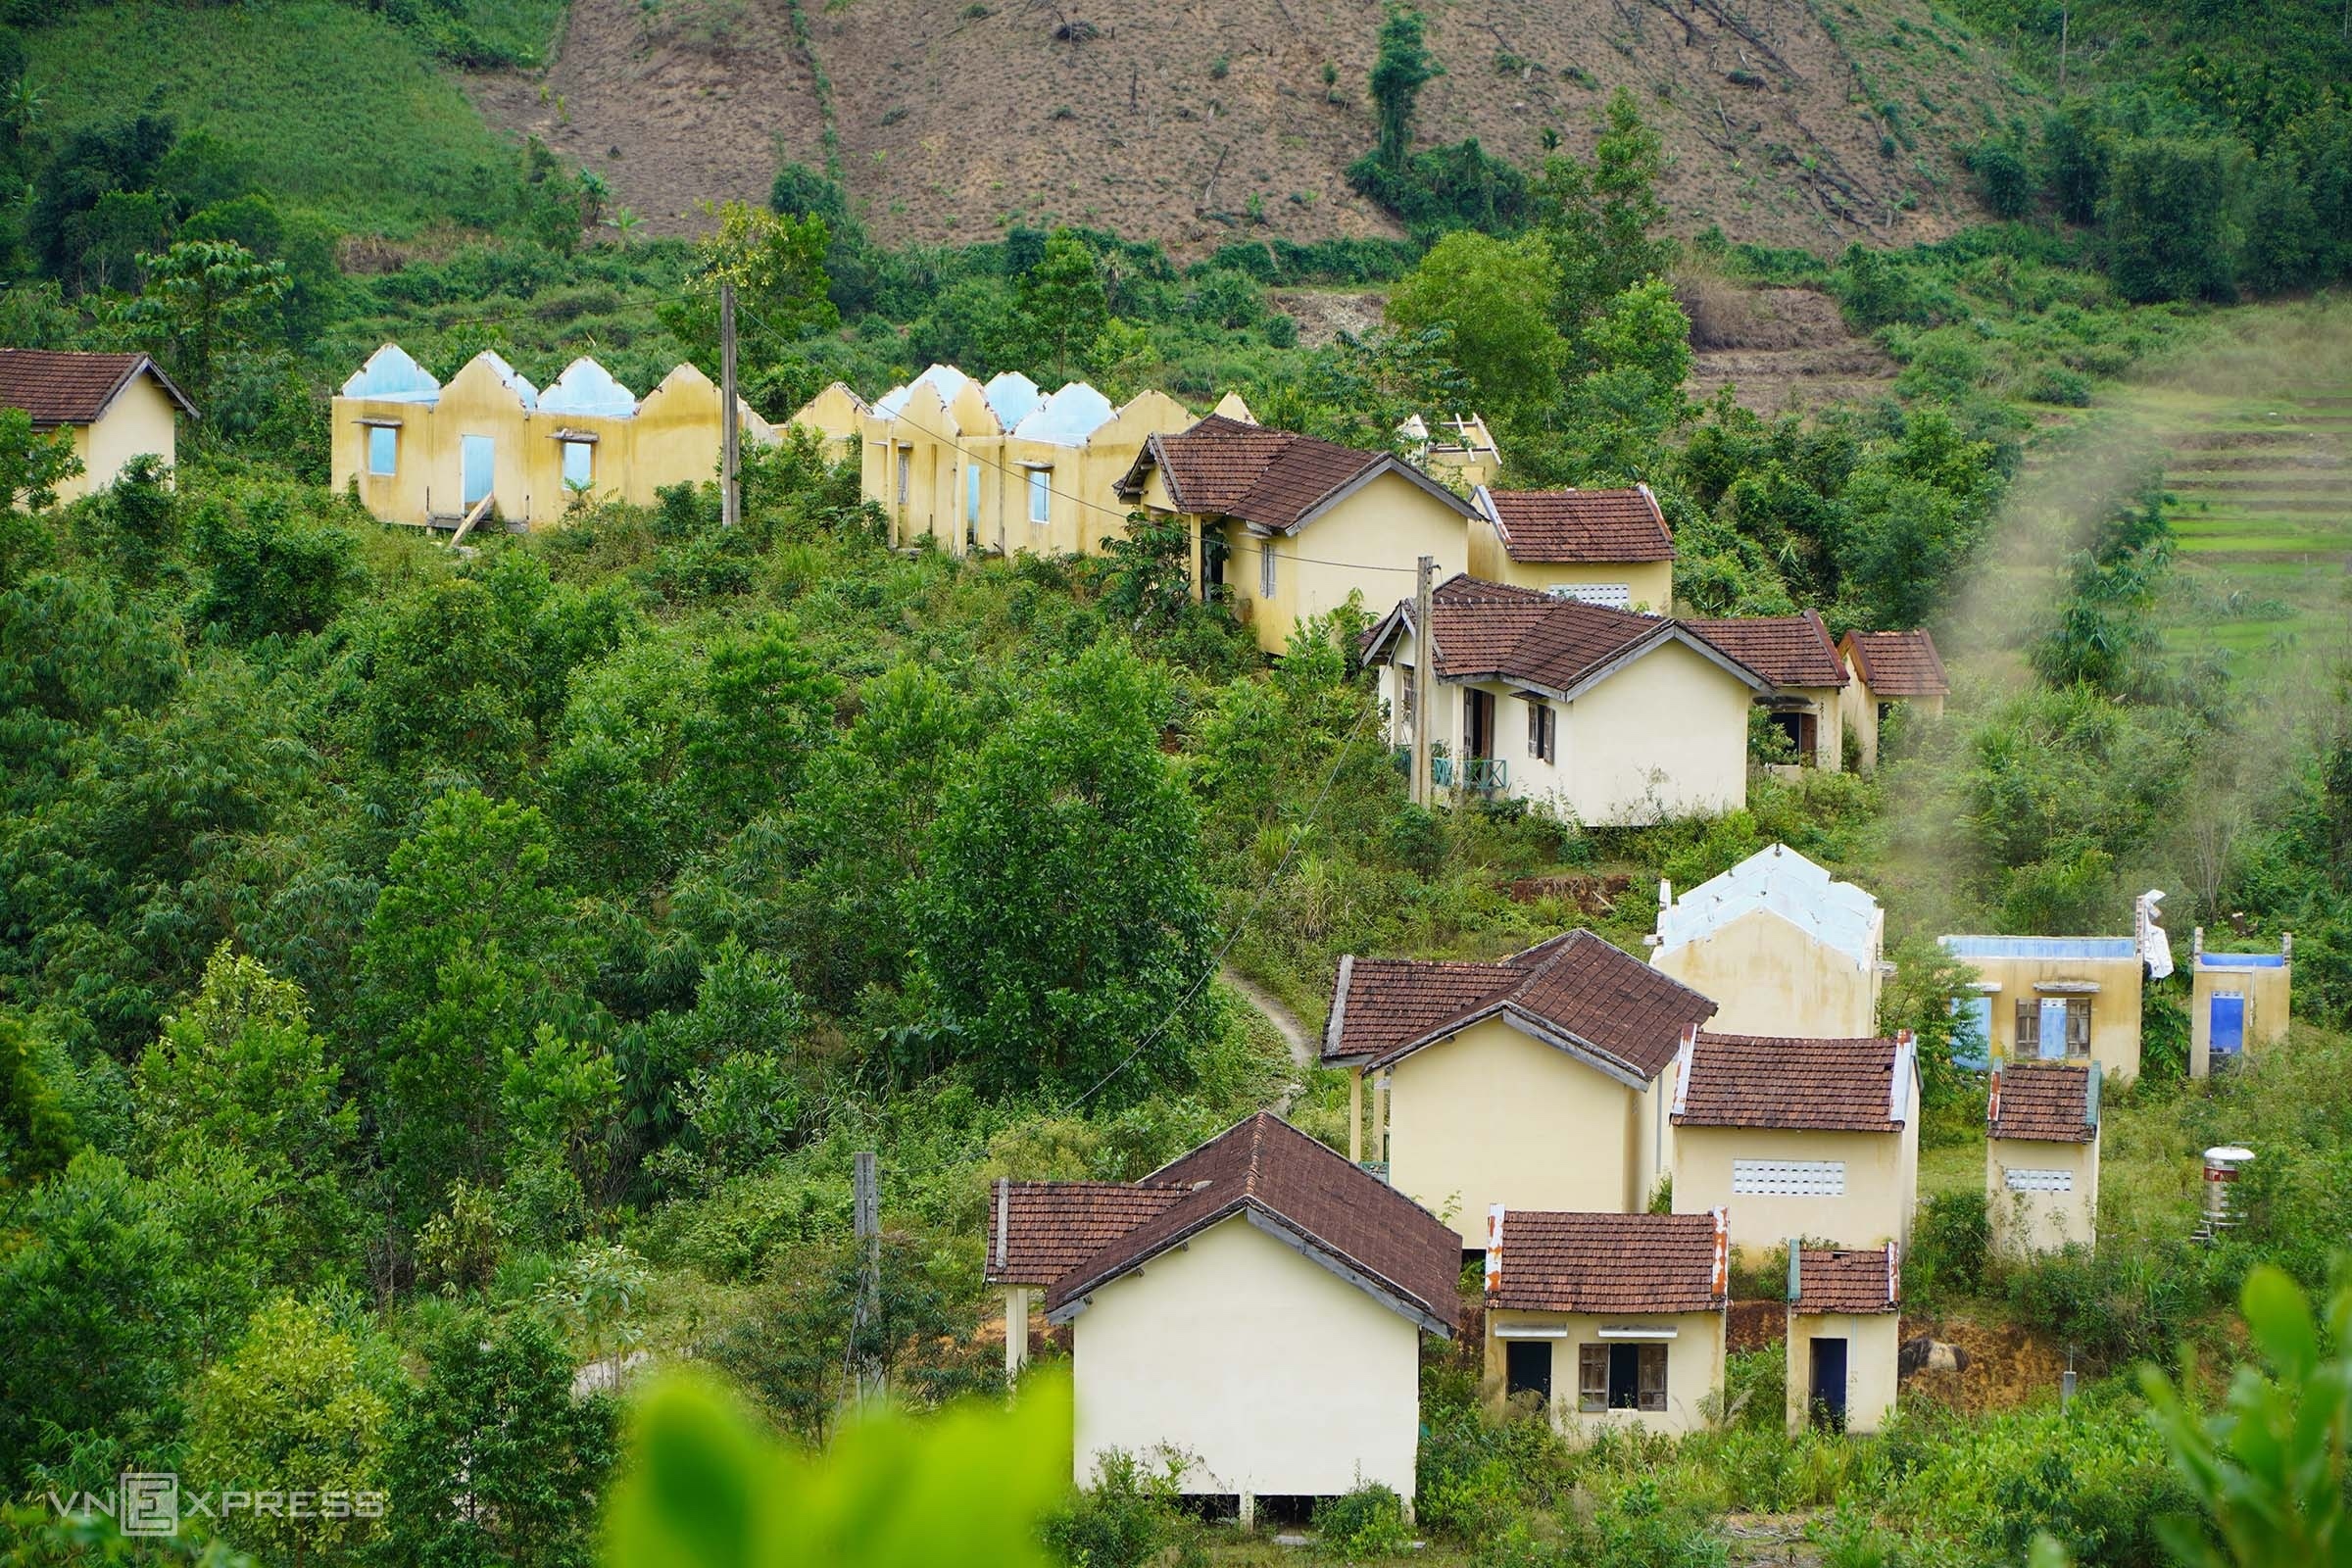 Resettlement houses for villagers affected by the Dak Drink hydropower plant on a mountain. Photo by VnExpress/Tran Hoa